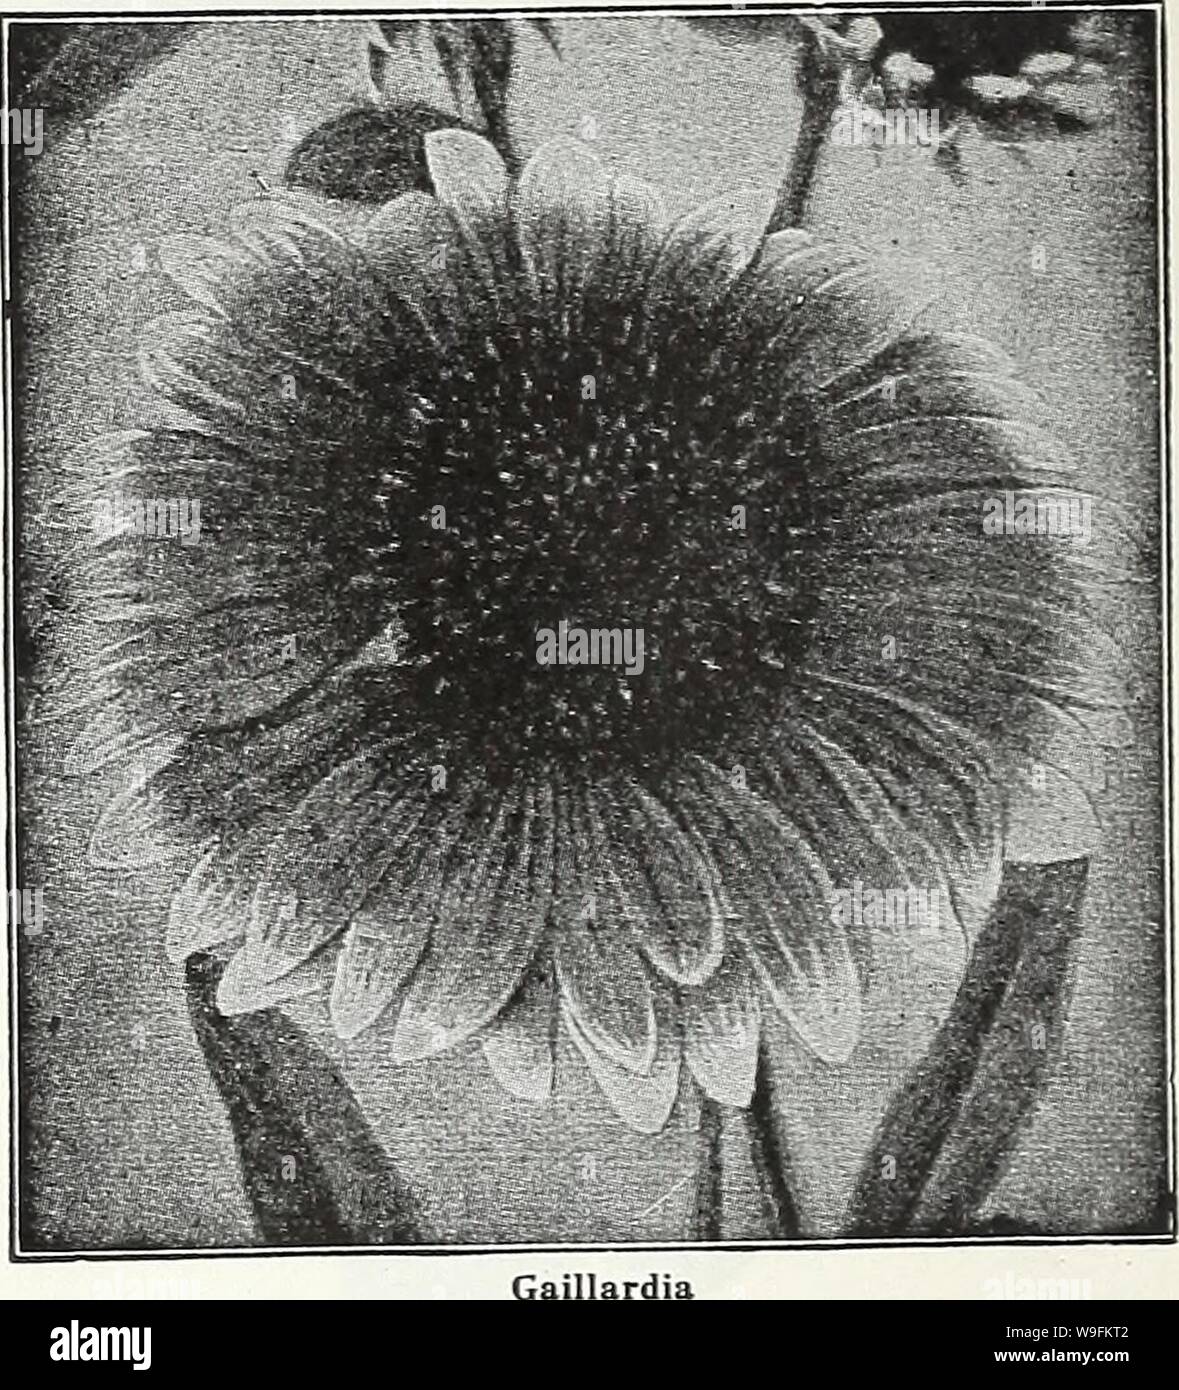 Archive image from page 51 of Currie's garden annual  62nd. Currie's garden annual : 62nd year spring 1937  curriesgardenann19curr 3 Year: 1937 ( Page 48 CURRIE BROTHERS CO MILWAUKEE, WIS GAILLARDIA THE DAZZLER—The flowers are very large, of dark, rich red with a bright orange tip on the end of each petal, mak- ing it a very attractive flower for florists and for table decoration. Seeds Pkt. 20c PORTOLA HYBRIDS—This superb new strain of perennial Gaillardias produces flowers of immense size, the colors ranging through shades of bronzy red, with golden tipped petals; splendid for cutting. Seeds Stock Photo